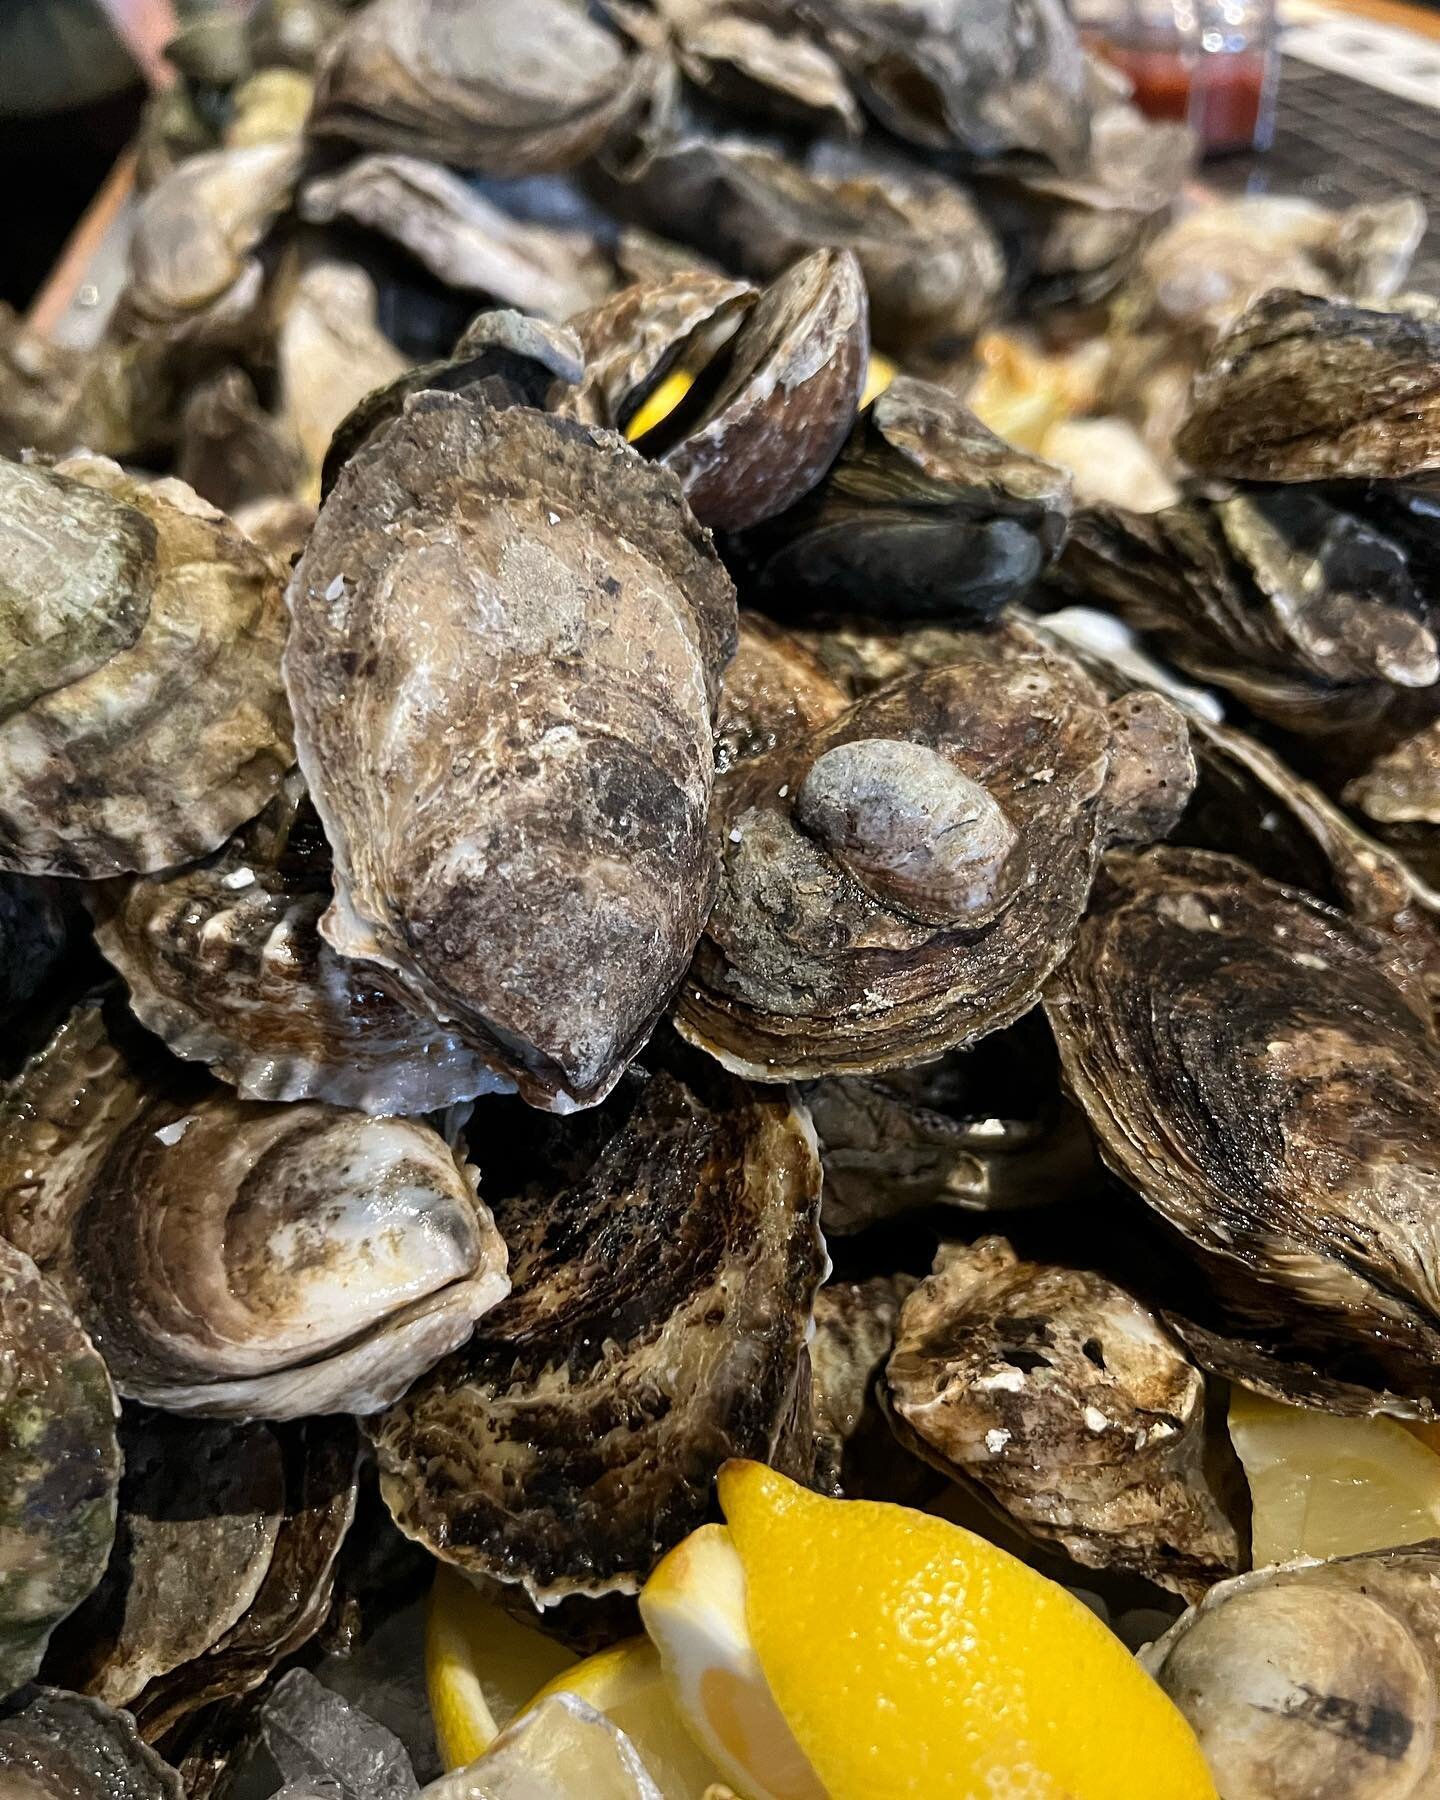 2 dollar oysters, no corkage fee and 7 dollar select cocktails. Shucking 5-8:30. See you tonight!

#roc #rocfoodies